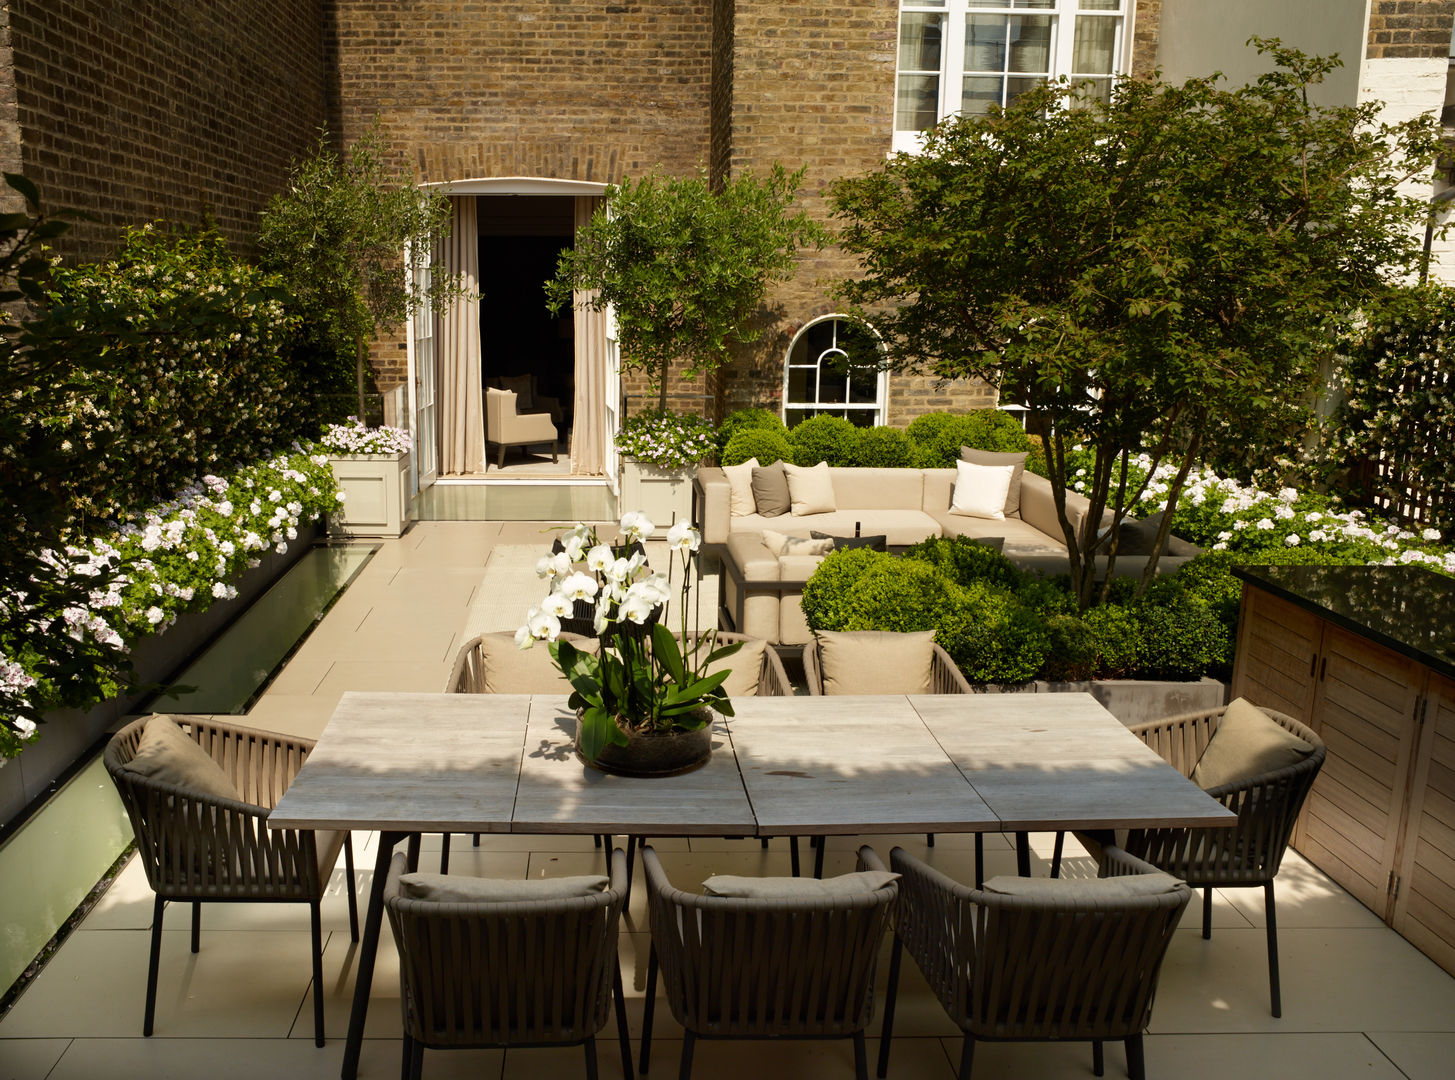 A London Roof Garden, Bowles & Wyer Bowles & Wyer Modern Terrace